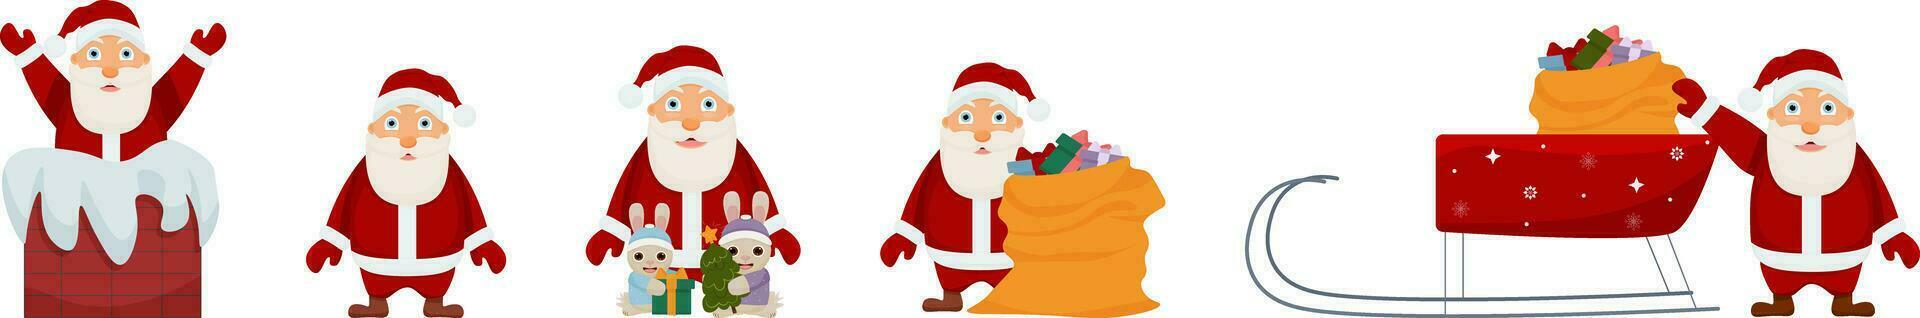 Vector illustration set Santa Claus, cartoon rabbits, bag of gifts, a sleigh, a chimney on a white background.